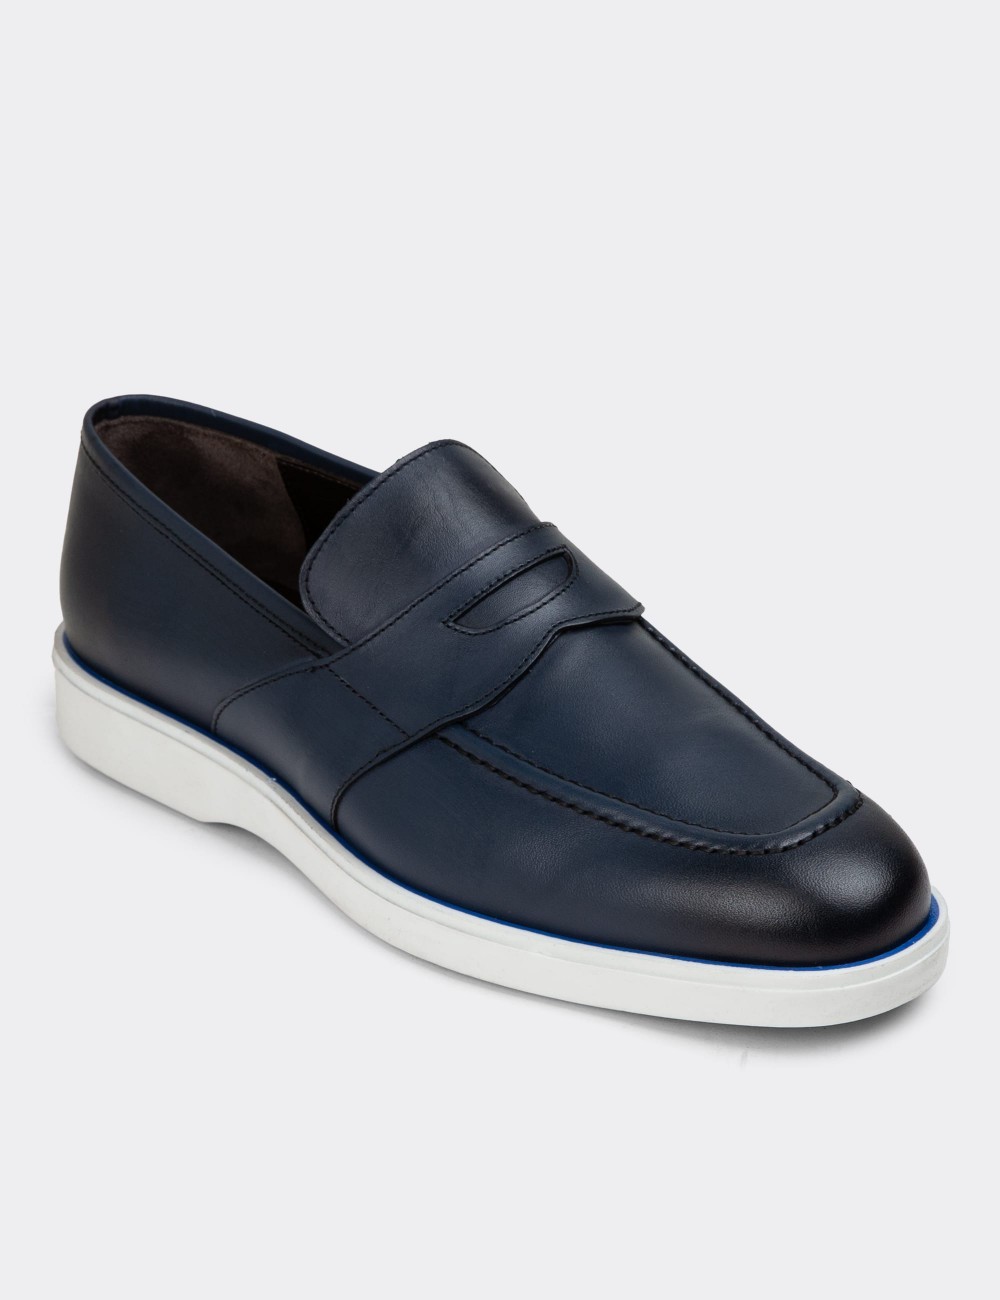 Blue Leather Loafers - 01960MMVIC01